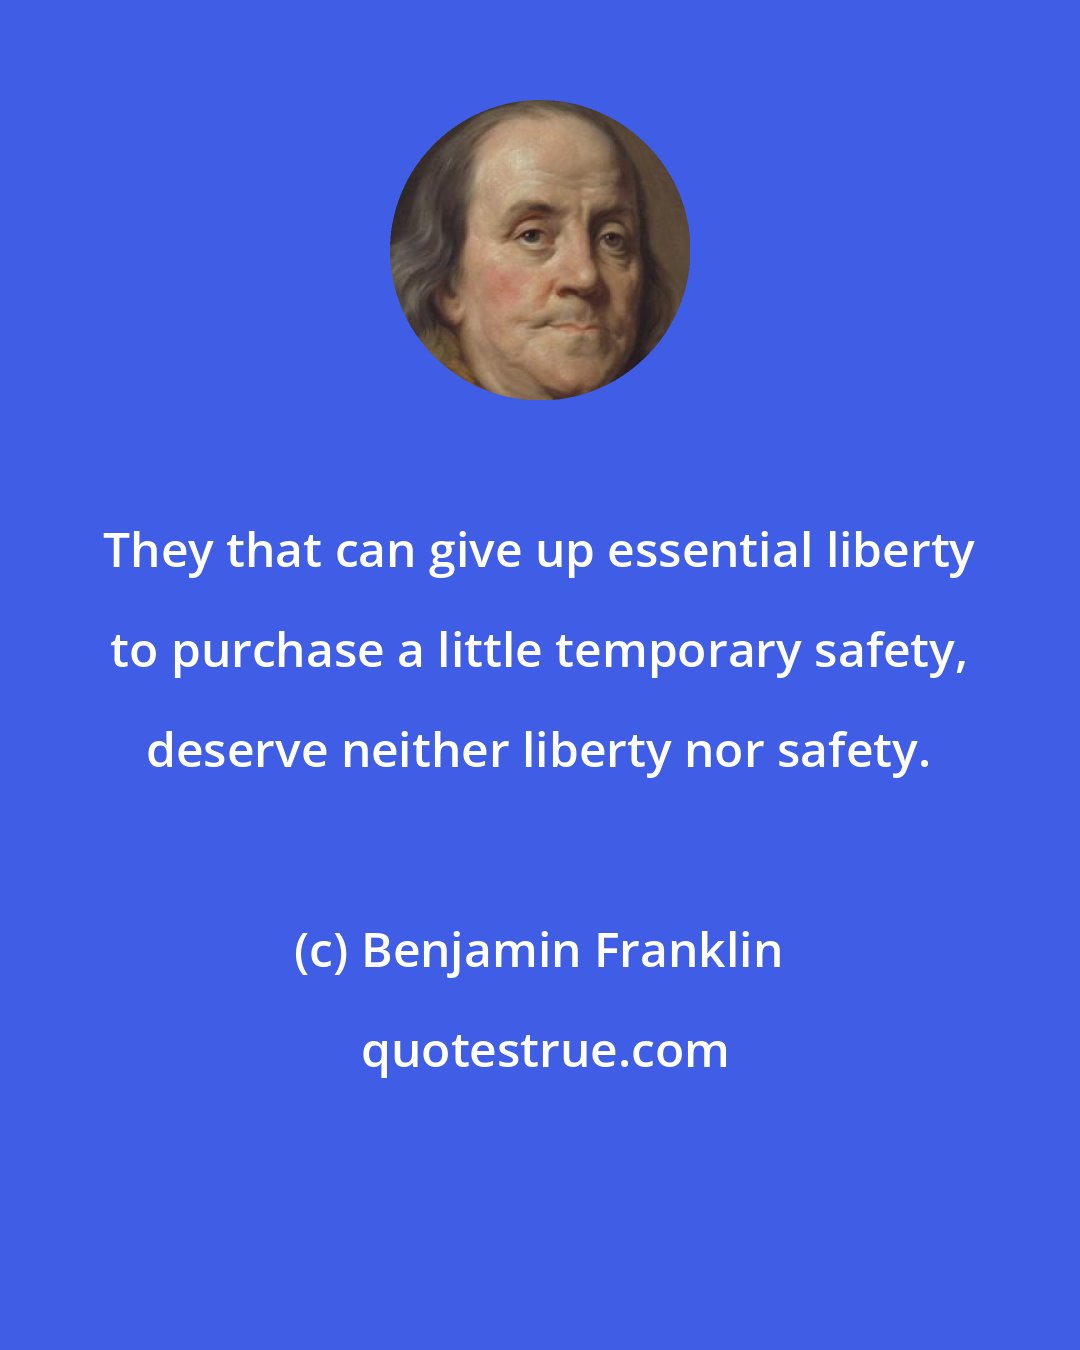 Benjamin Franklin: They that can give up essential liberty to purchase a little temporary safety, deserve neither liberty nor safety.